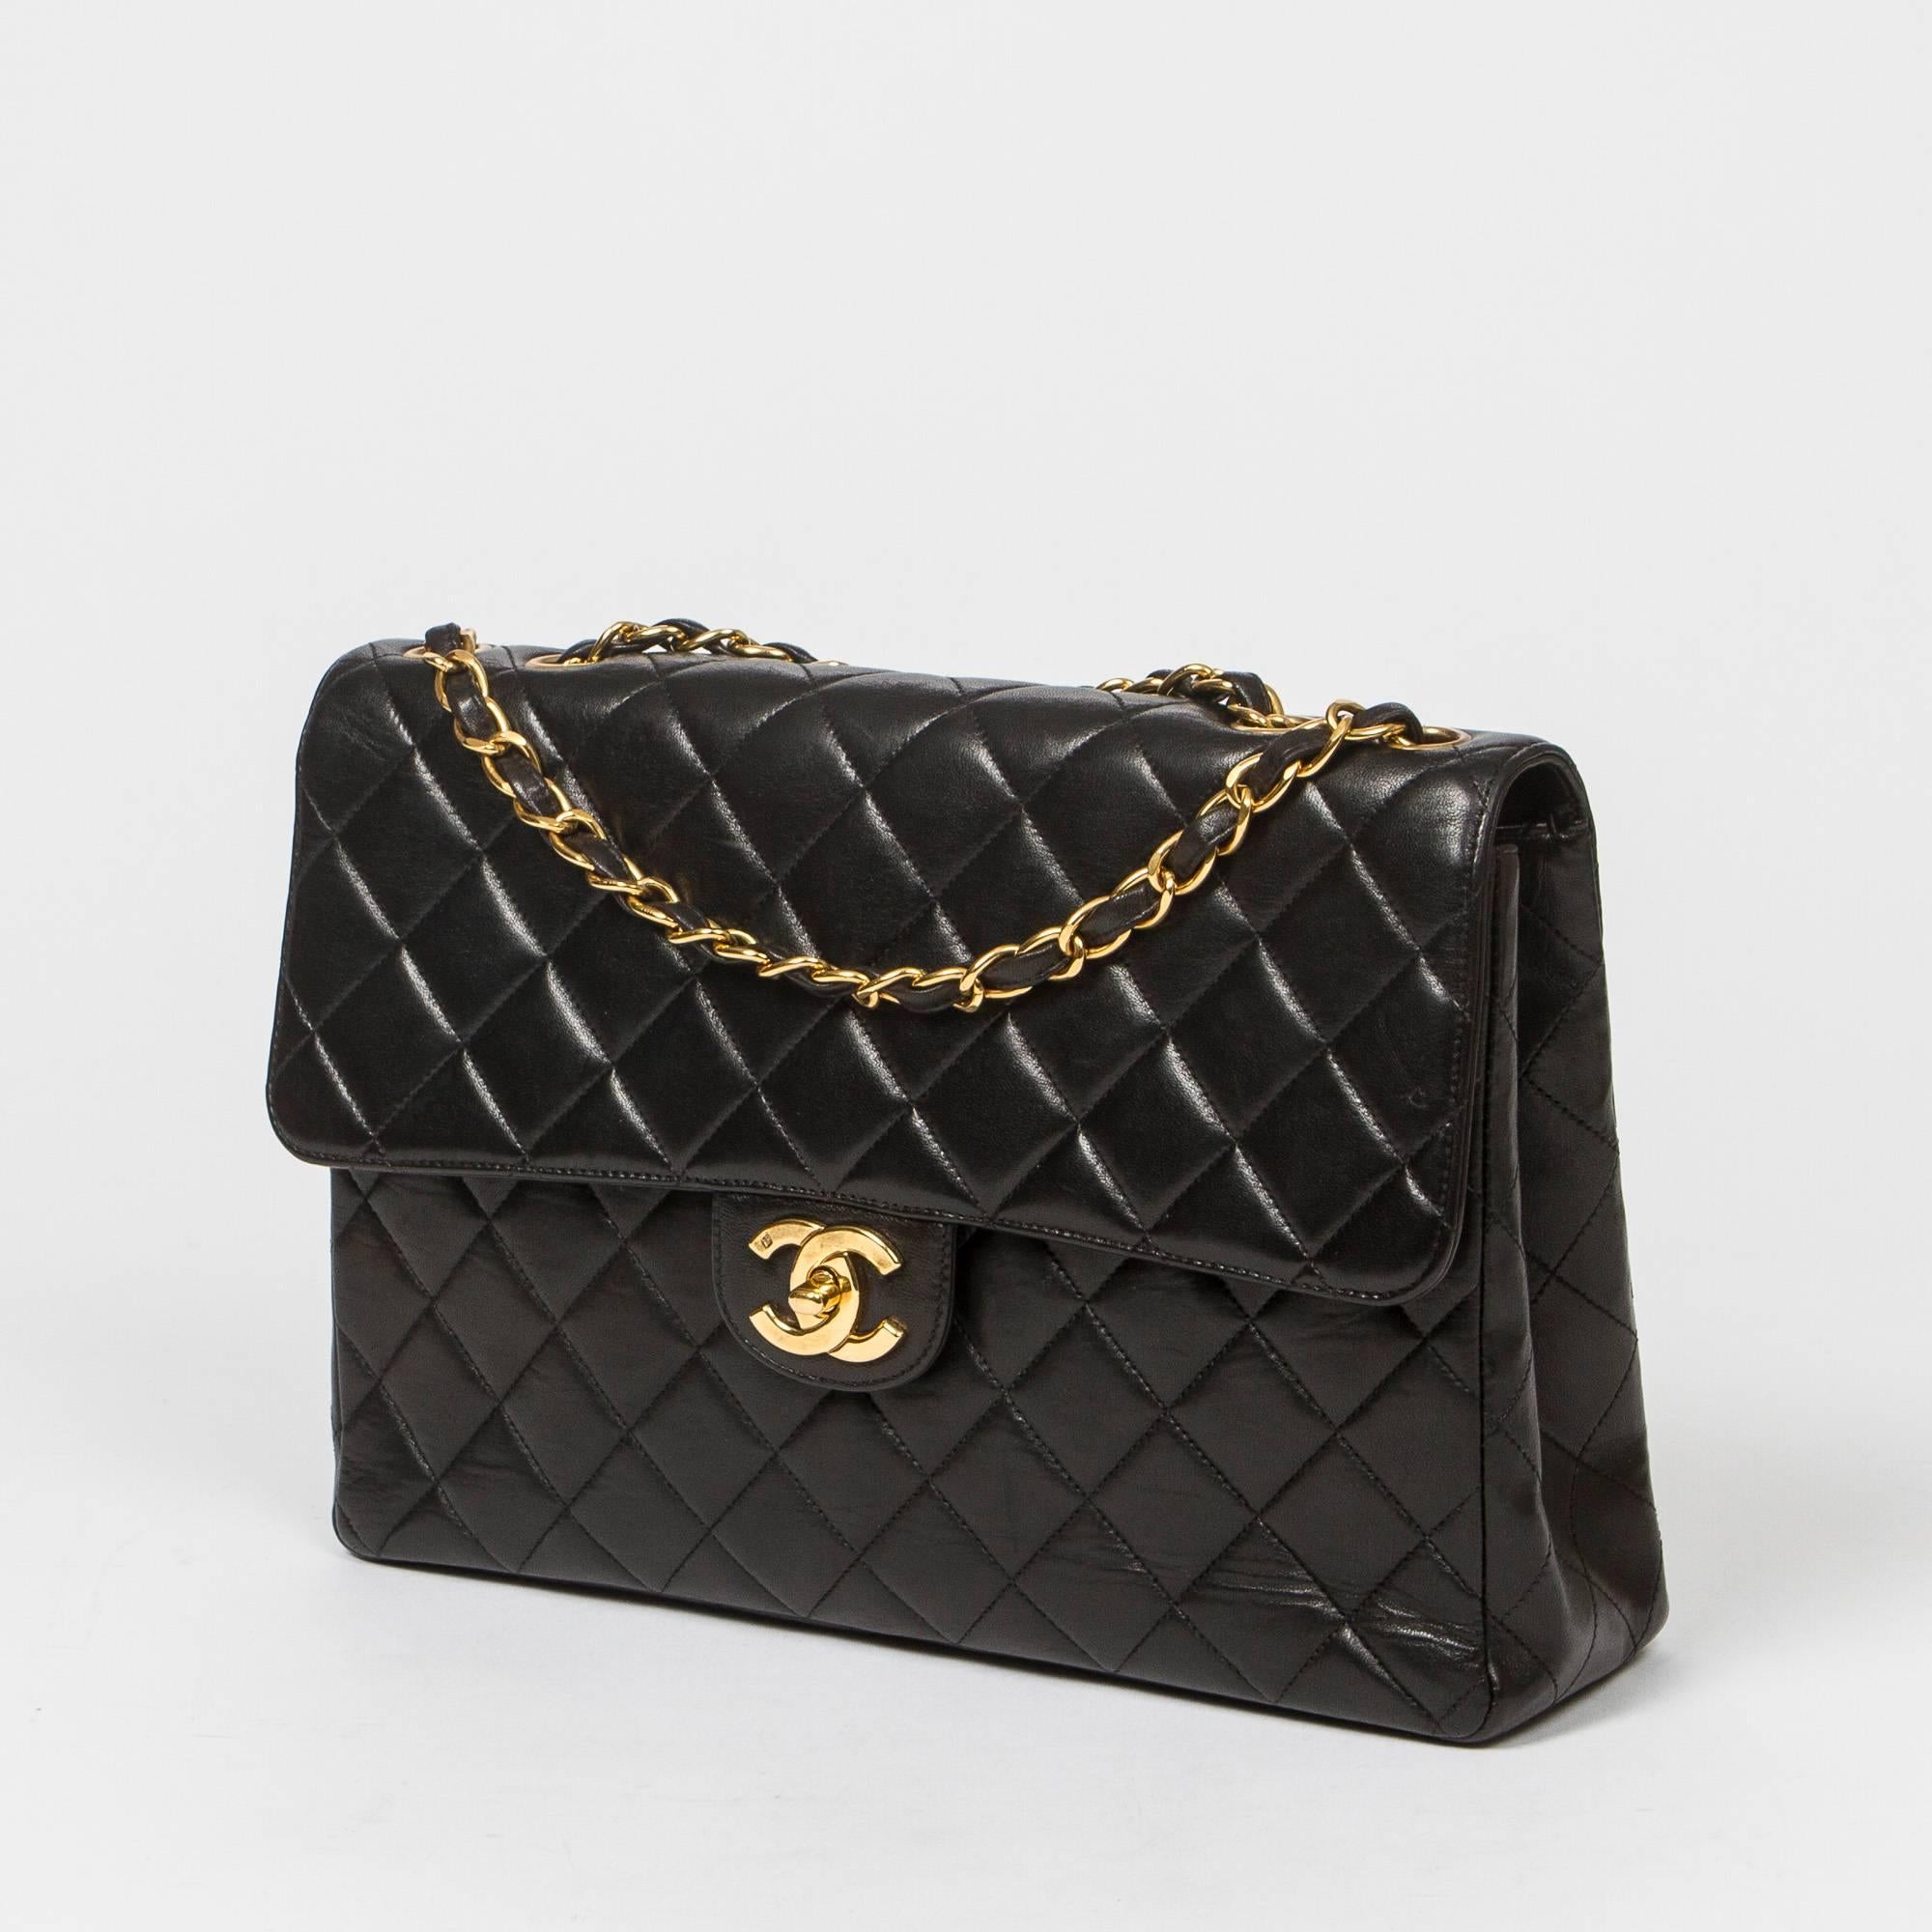 Jumbo in black quilted lambskin with double chain strap interlaced with black leather, signature CC turnlock, gold tone hardware.  Back slip pocket. Burgundy leather lined interior with one slip pocket and one zip pocket. Gold tone heat stamp